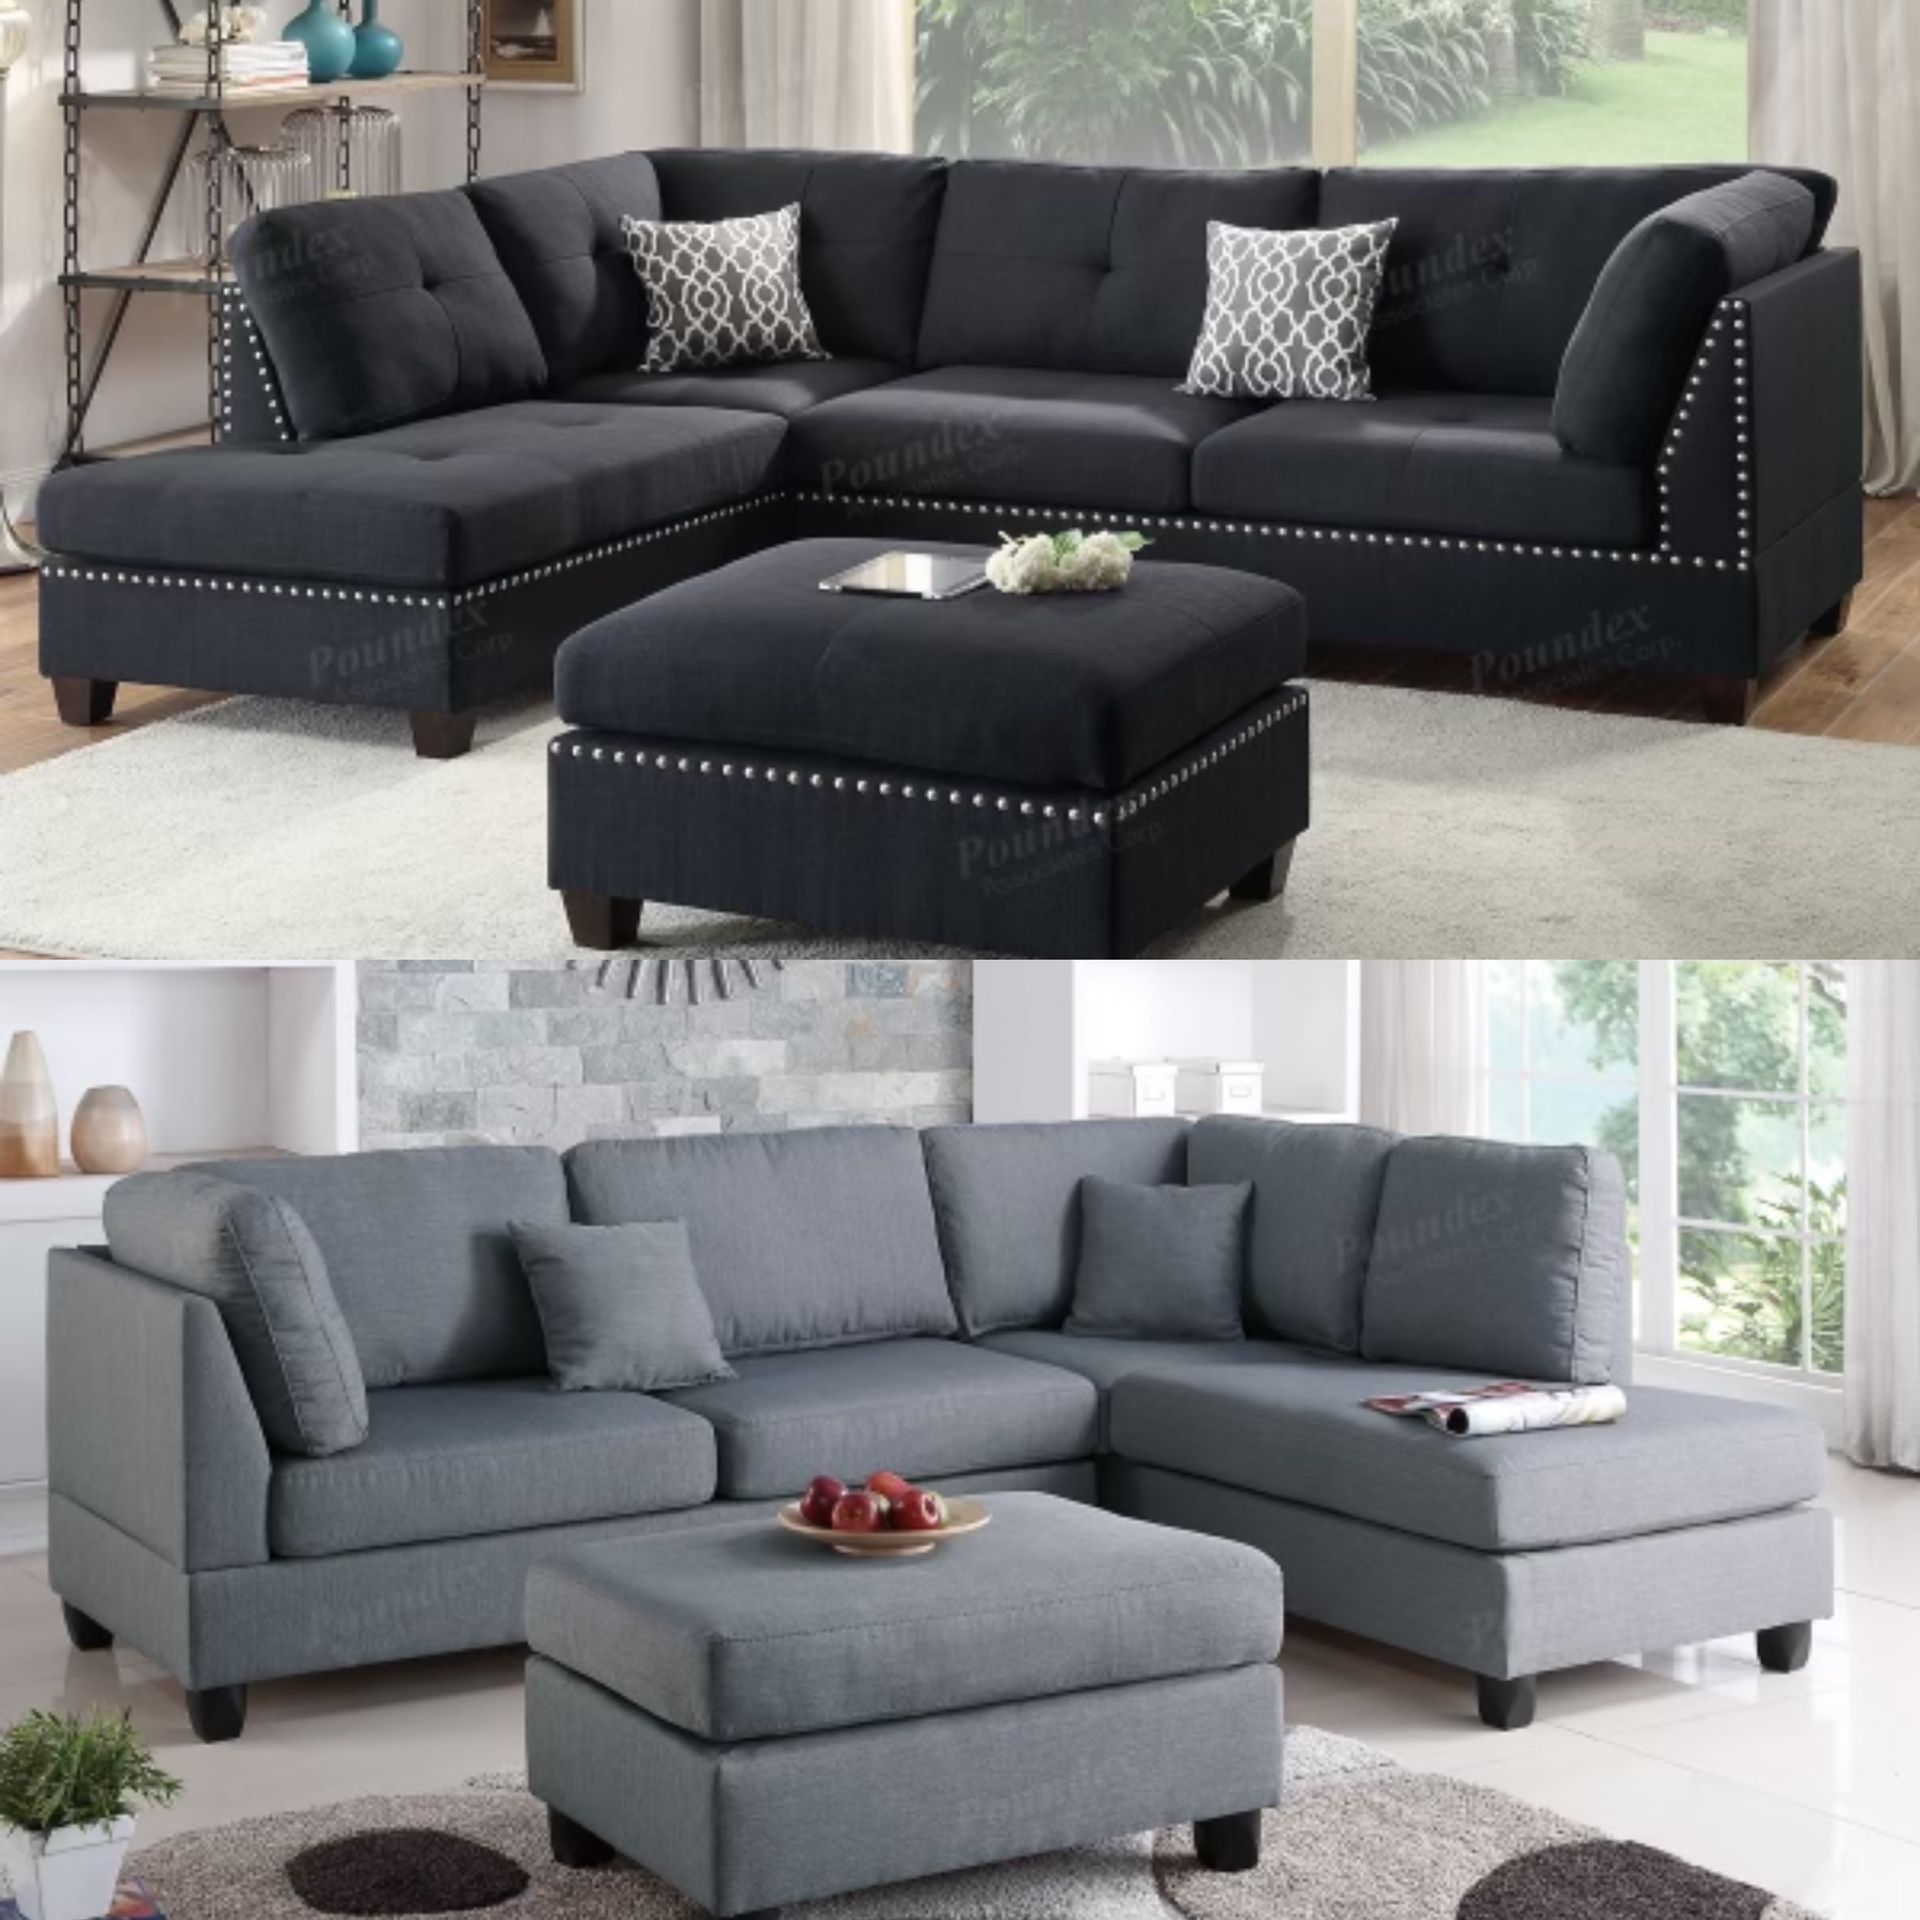 3pc Sectional Sofa With Matching Ottoman. New!